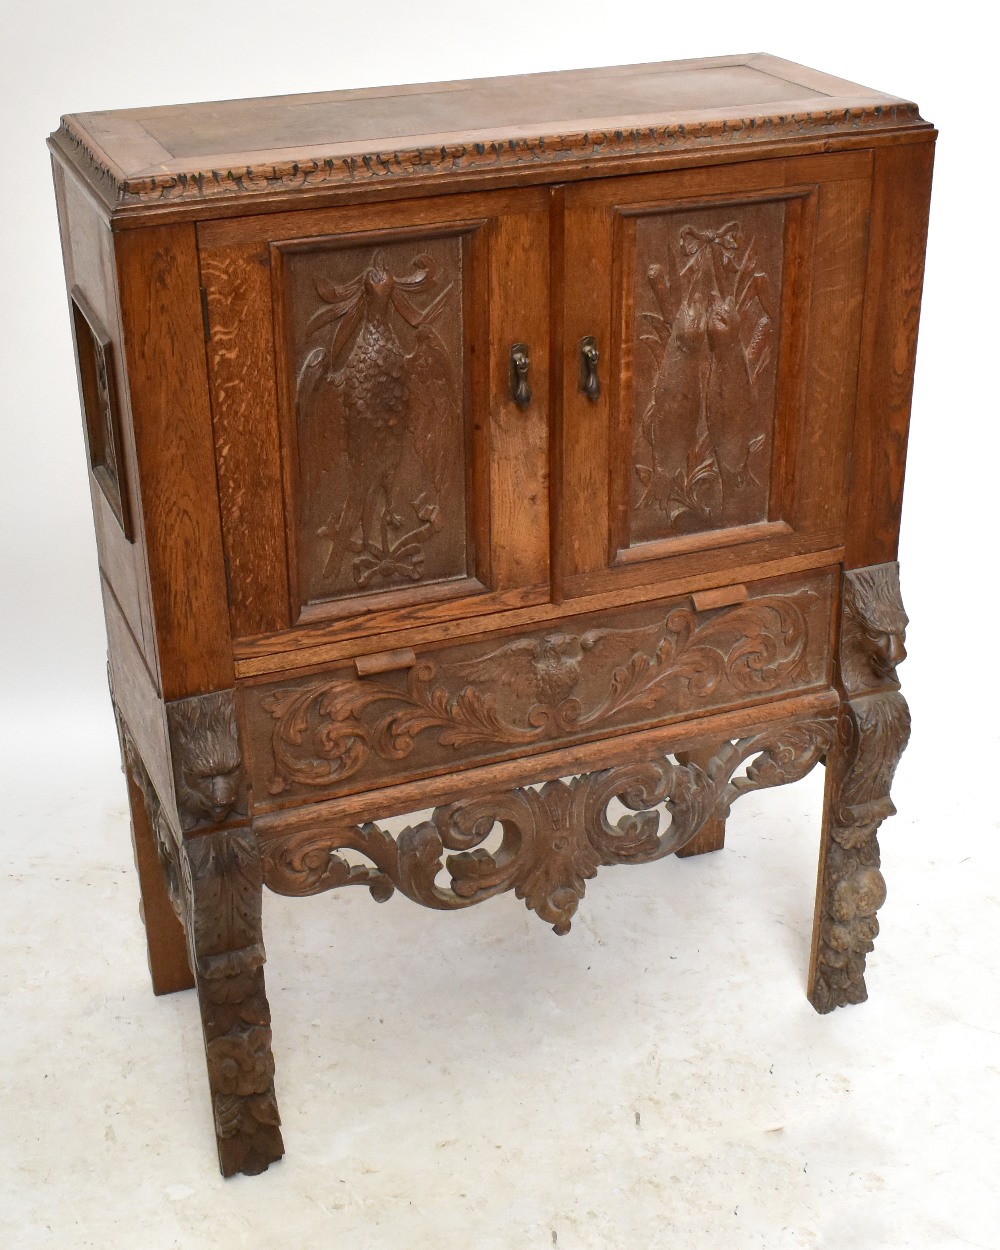 A late 19th century carved oak Black Forest-style side cabinet, the twin doors decorated with